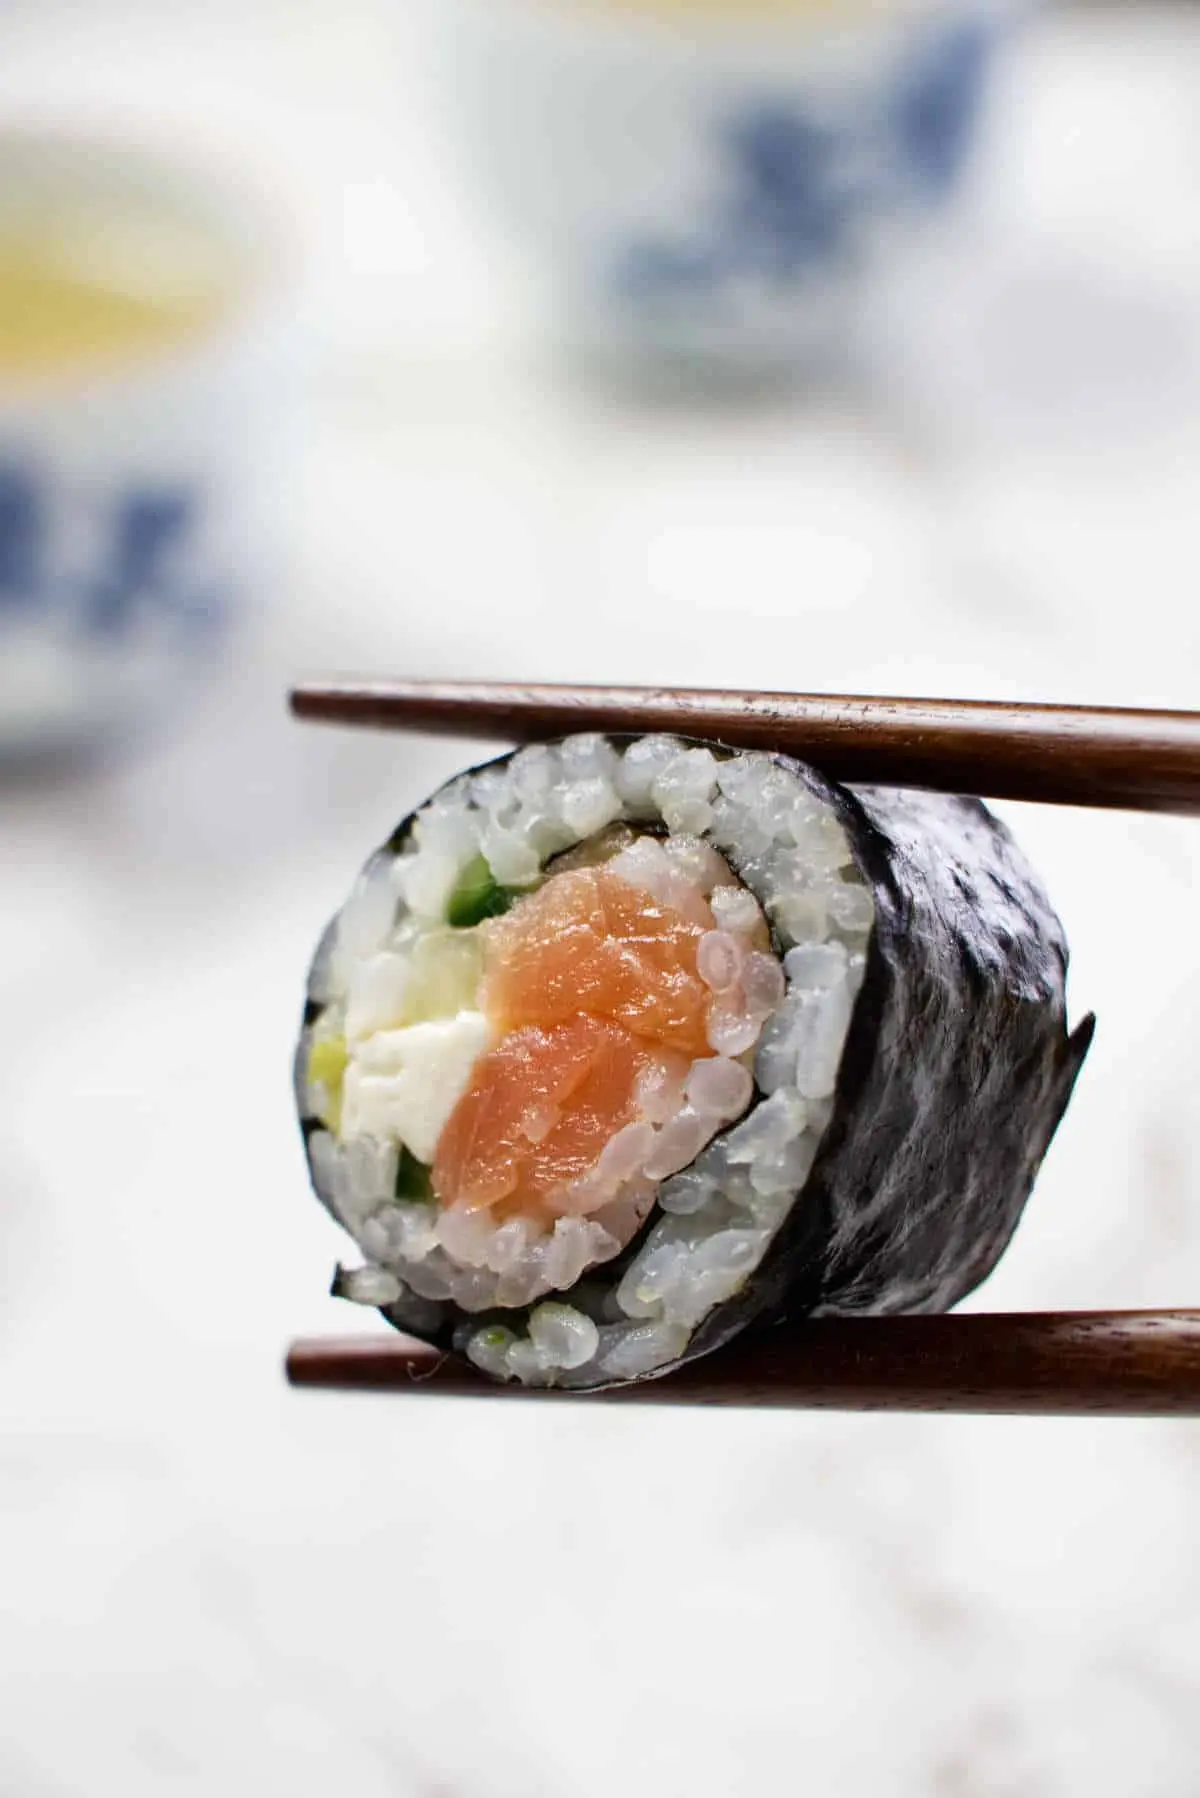 smoked salmon and cream cheese sushi - Does cream cheese go with sushi